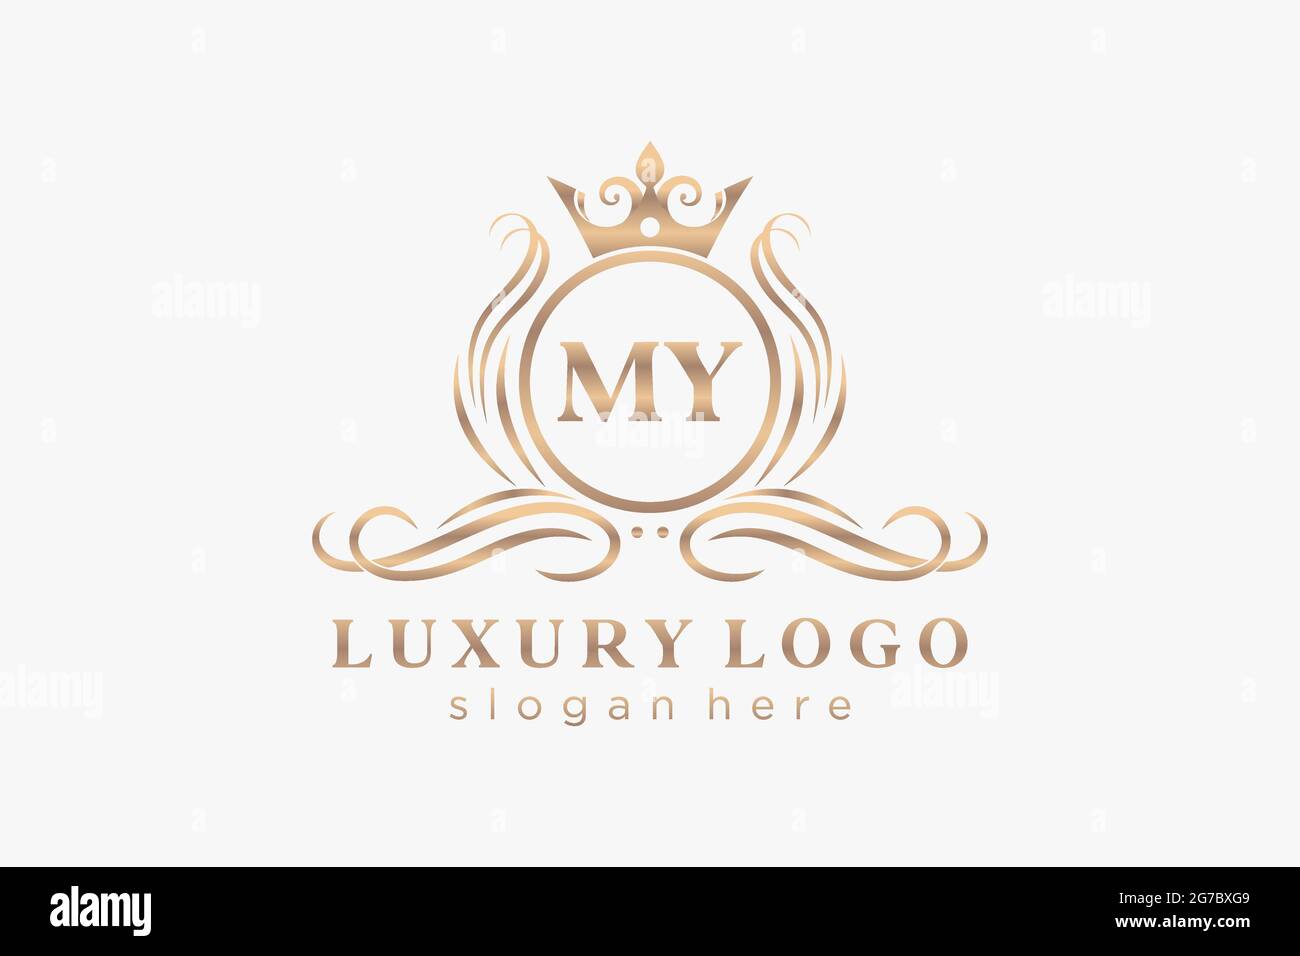 MY Letter Royal Luxury Logo template in vector art for Restaurant, Royalty, Boutique, Cafe, Hotel, Heraldic, Jewelry, Fashion and other vector illustr Stock Vector